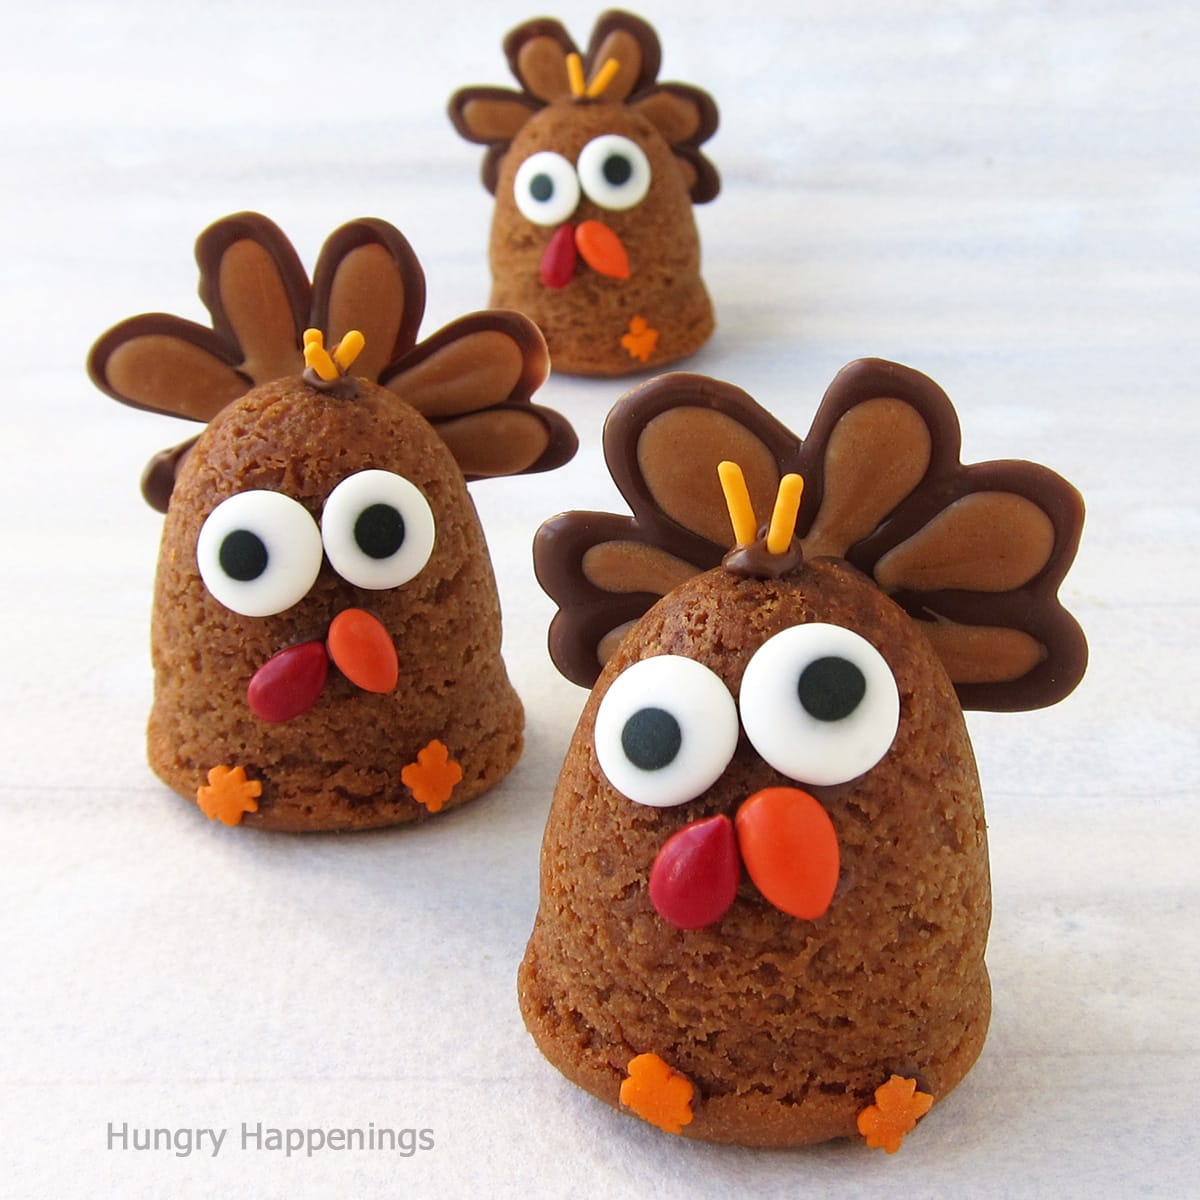 Turkey Cookies made with decorated peanut butter cookies.